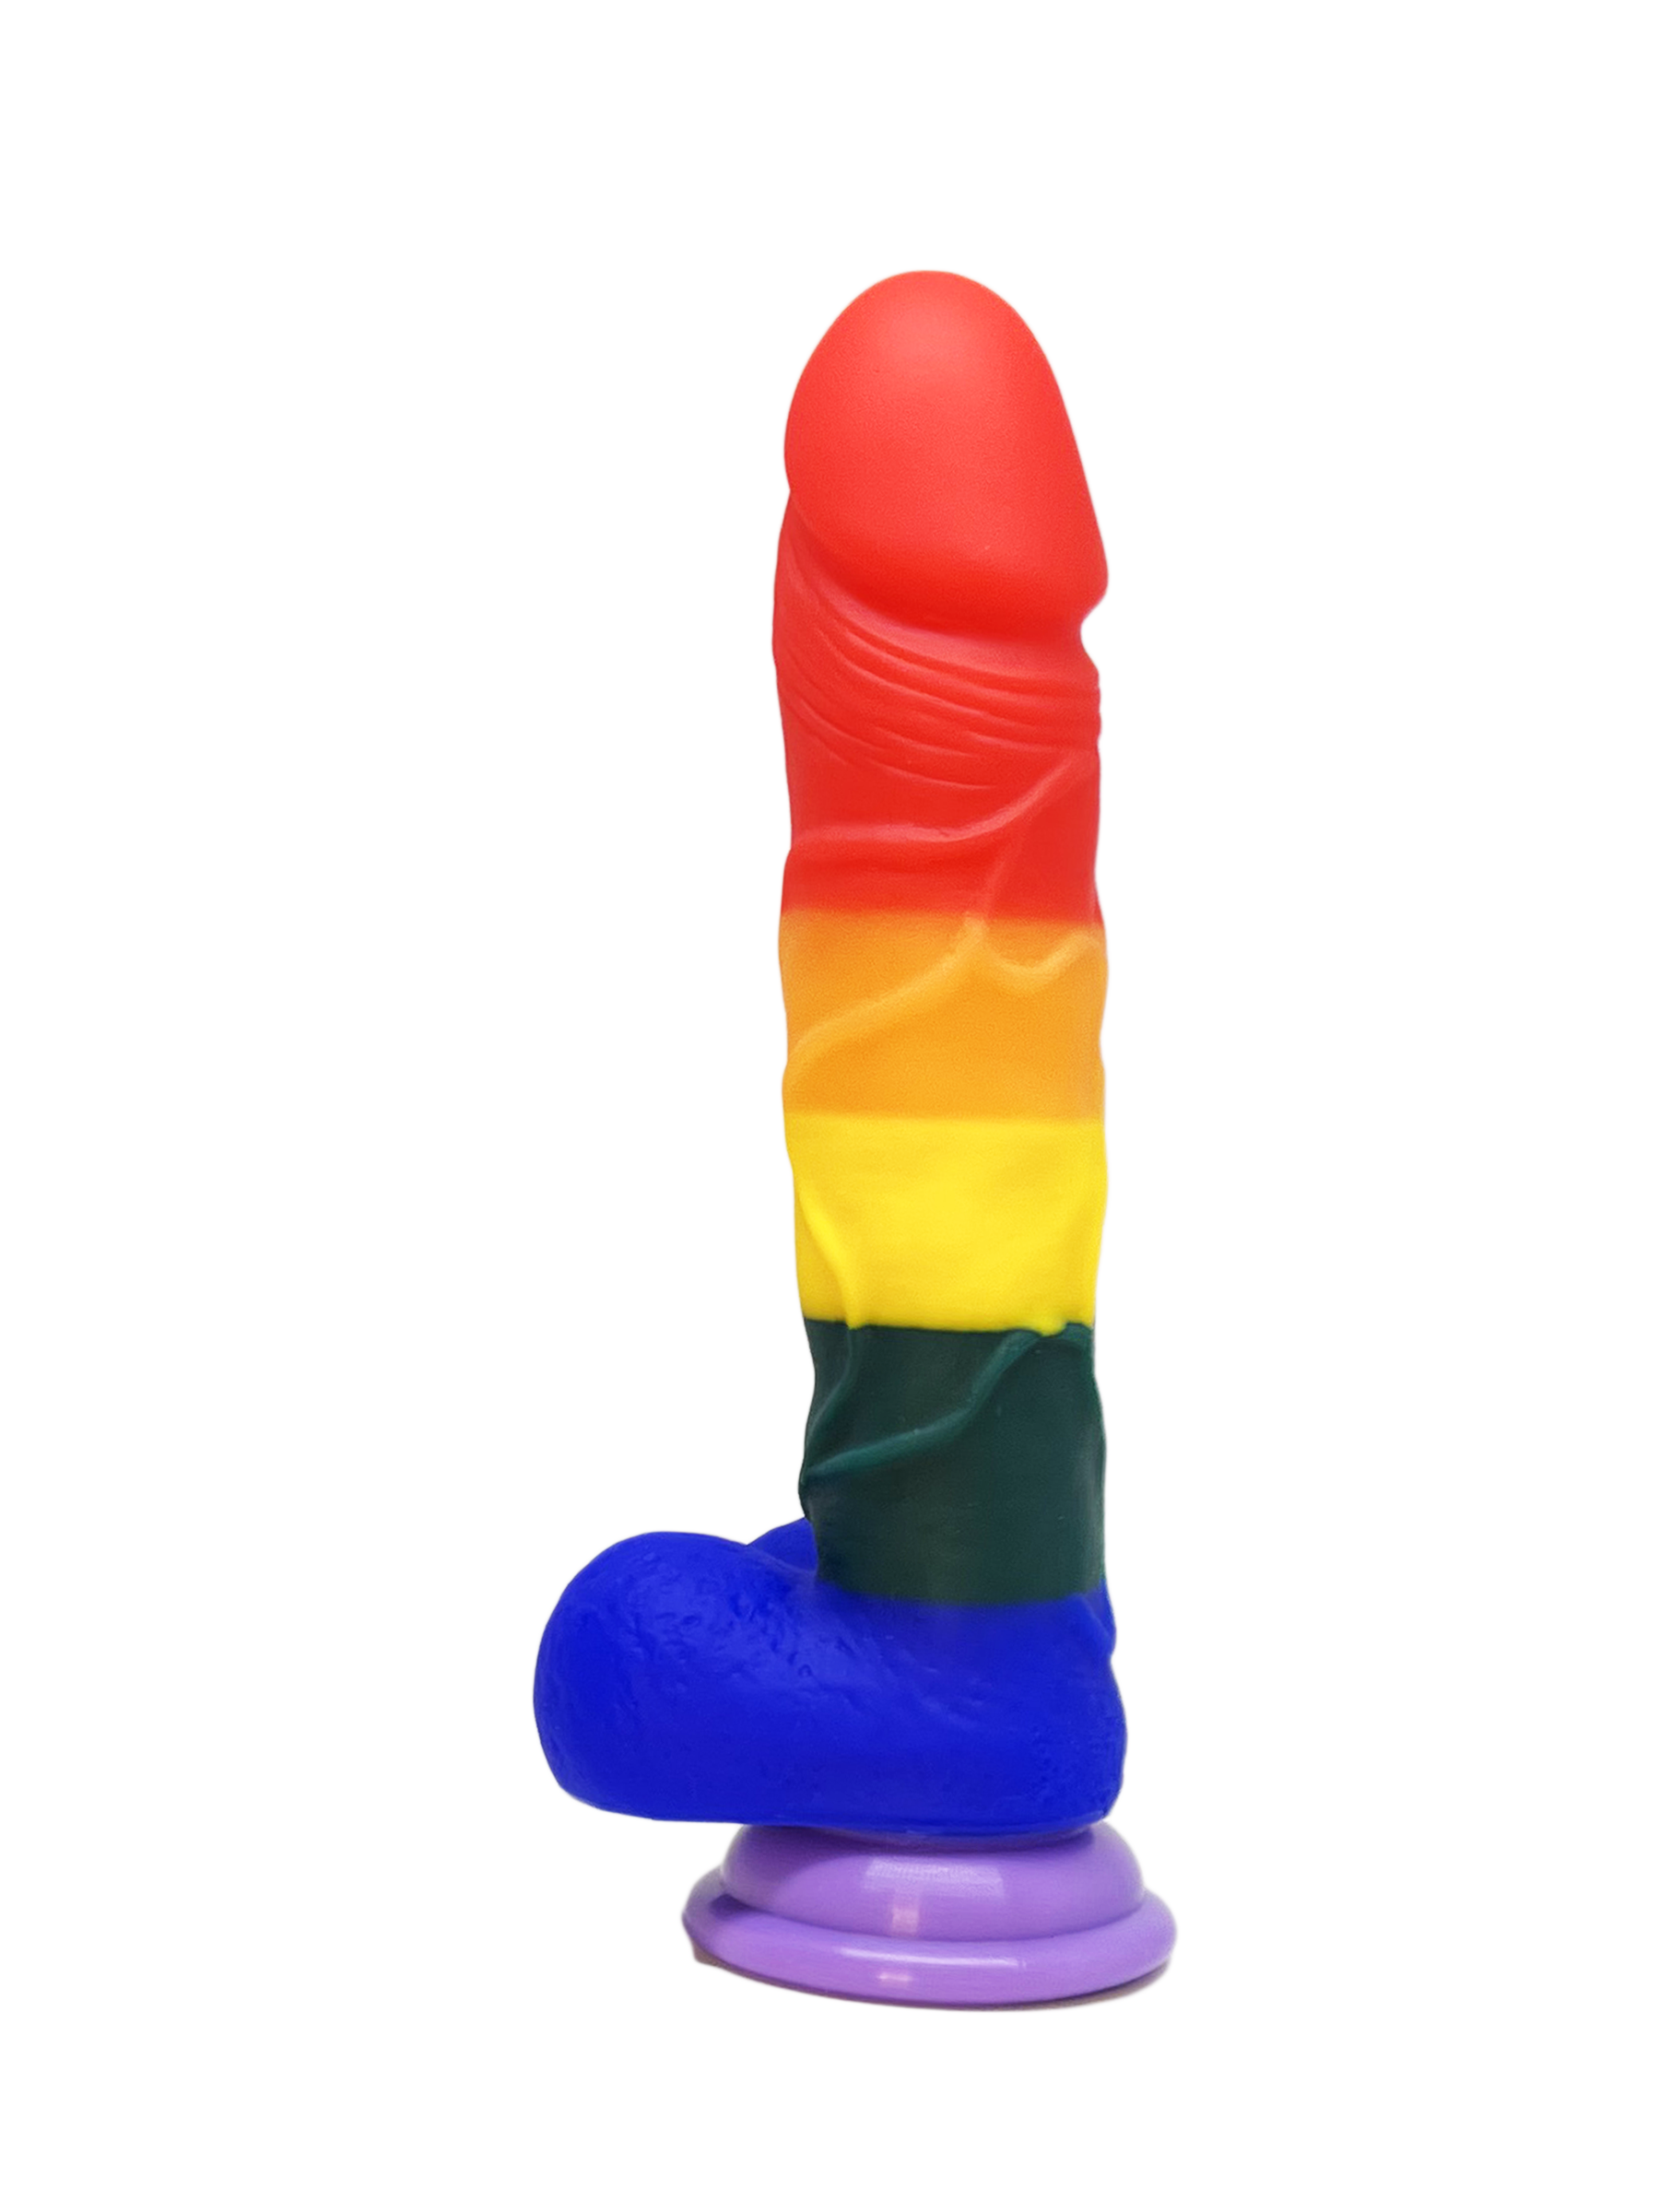 Another Gay Rainbow Dildo - Come As You Are